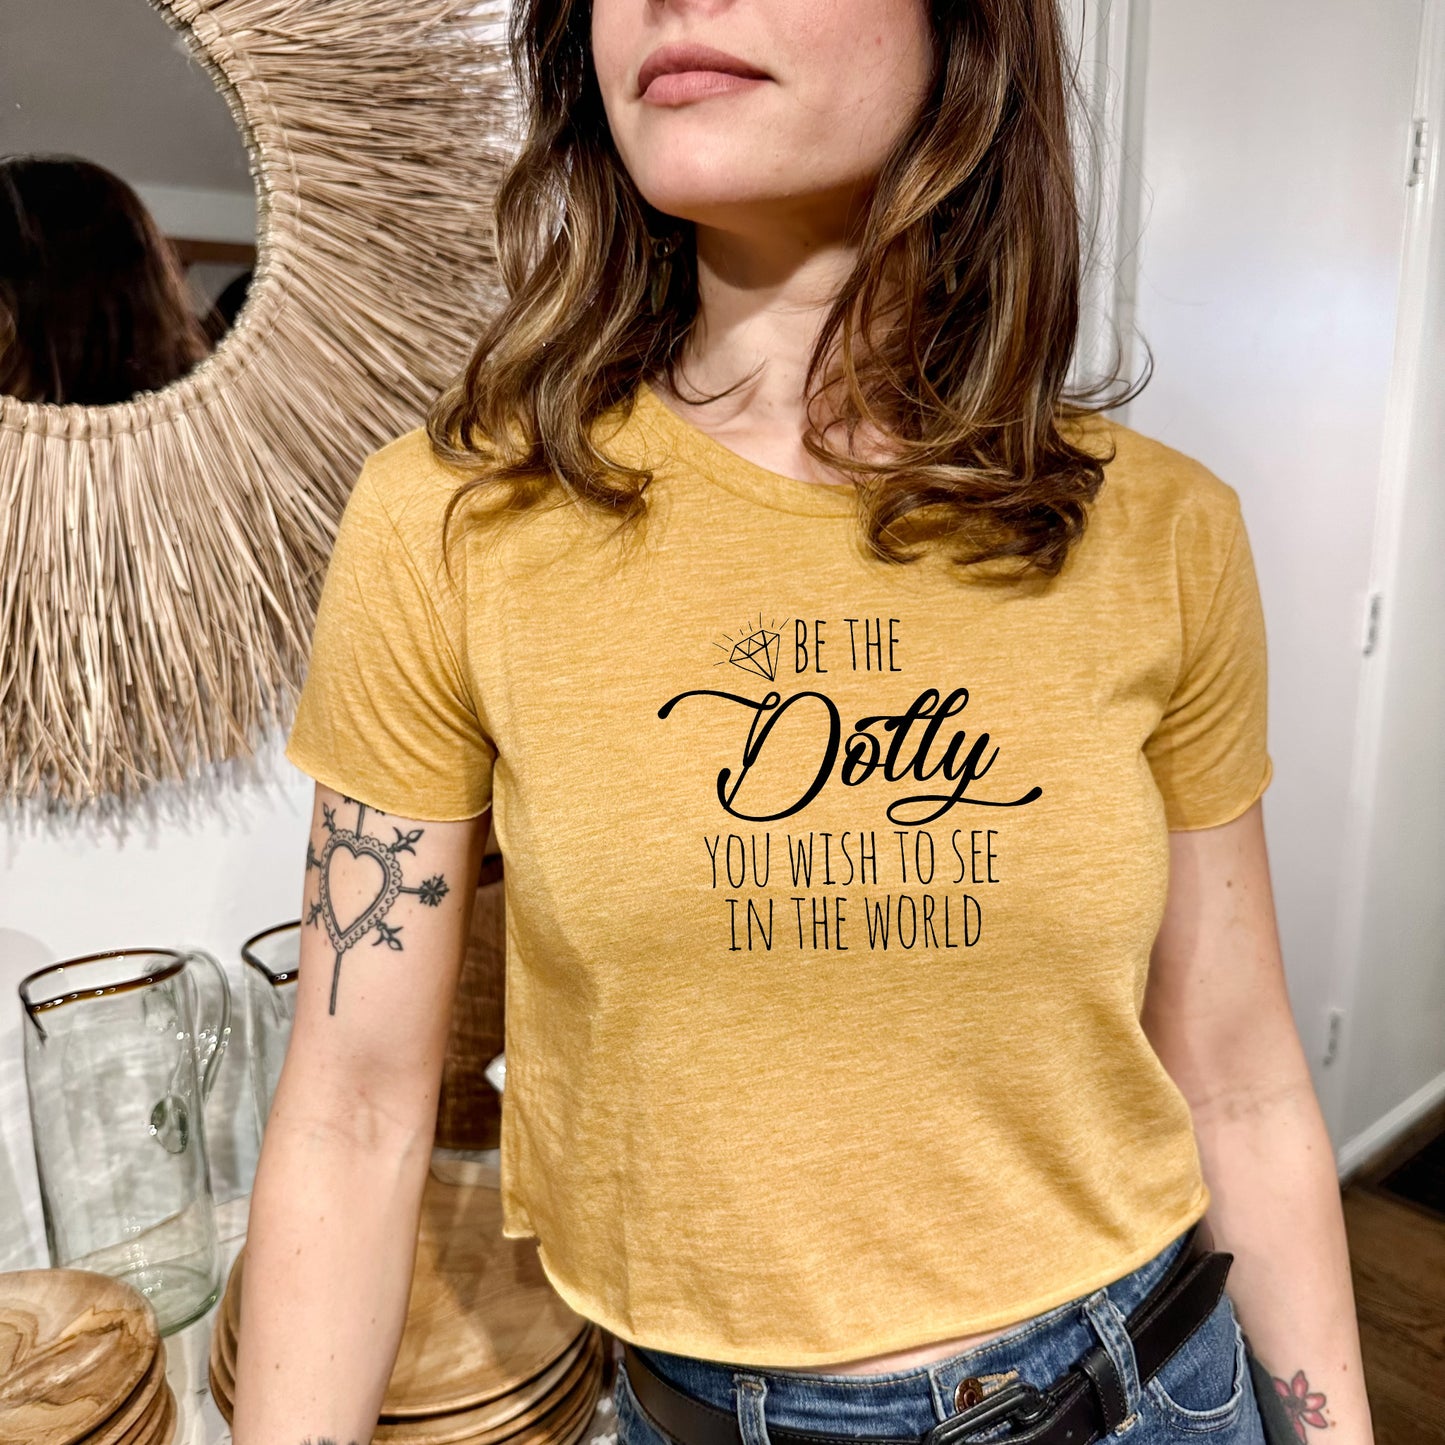 Be the Dolly You Wish to See in the World (Dolly Parton) - Women's Crop Tee - Heather Gray or Gold